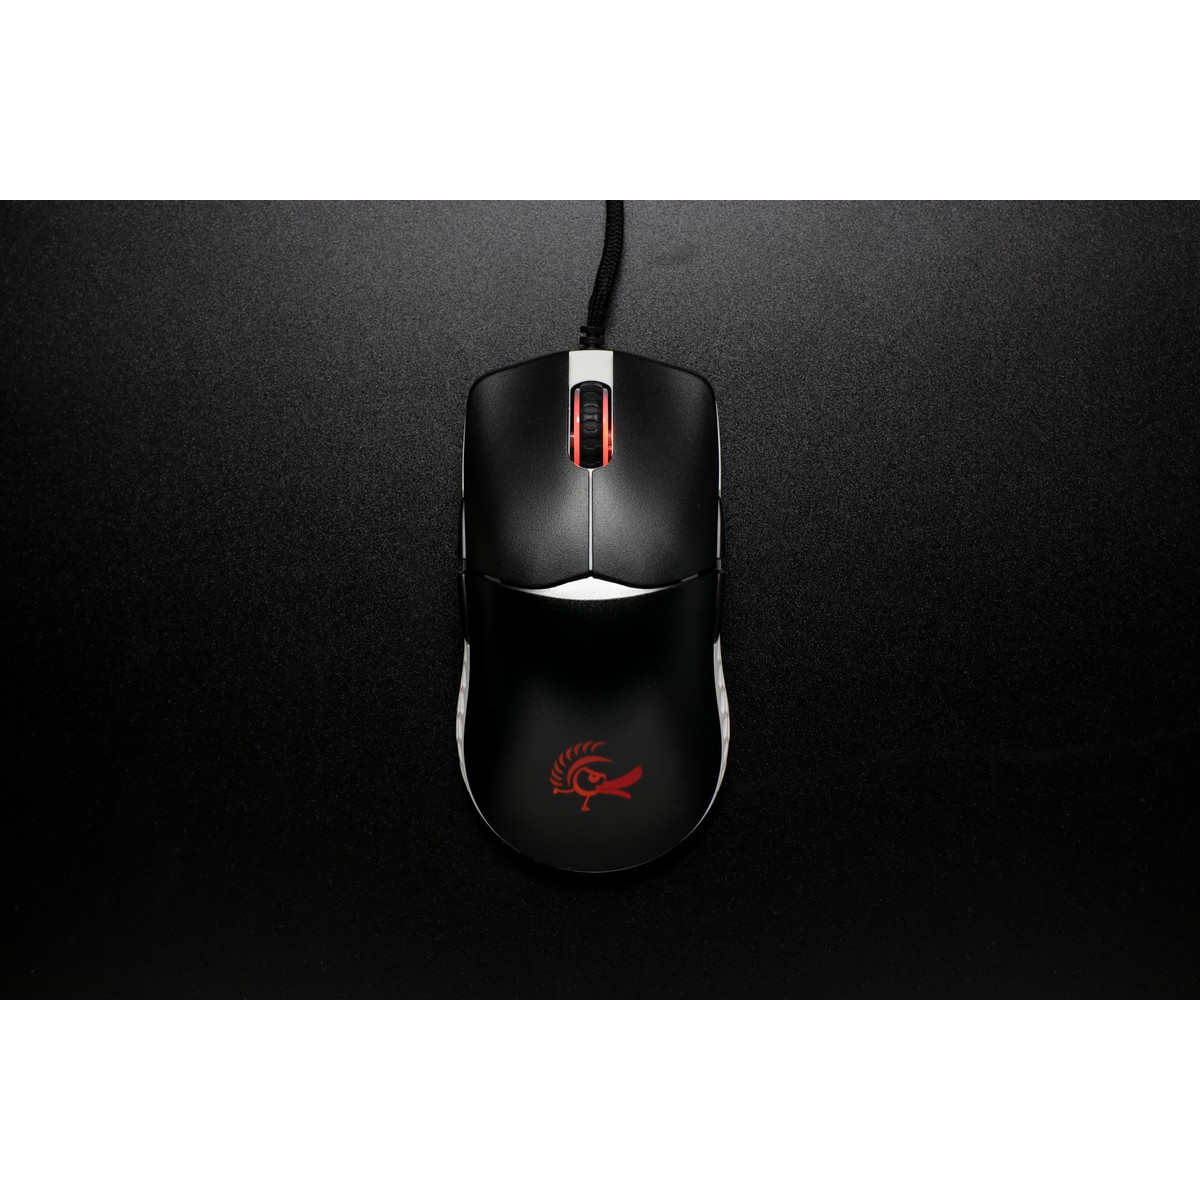 Ducky - Ducky Feather USB Optical Huano switch RGB Lightweight Optical Gaming Mouse